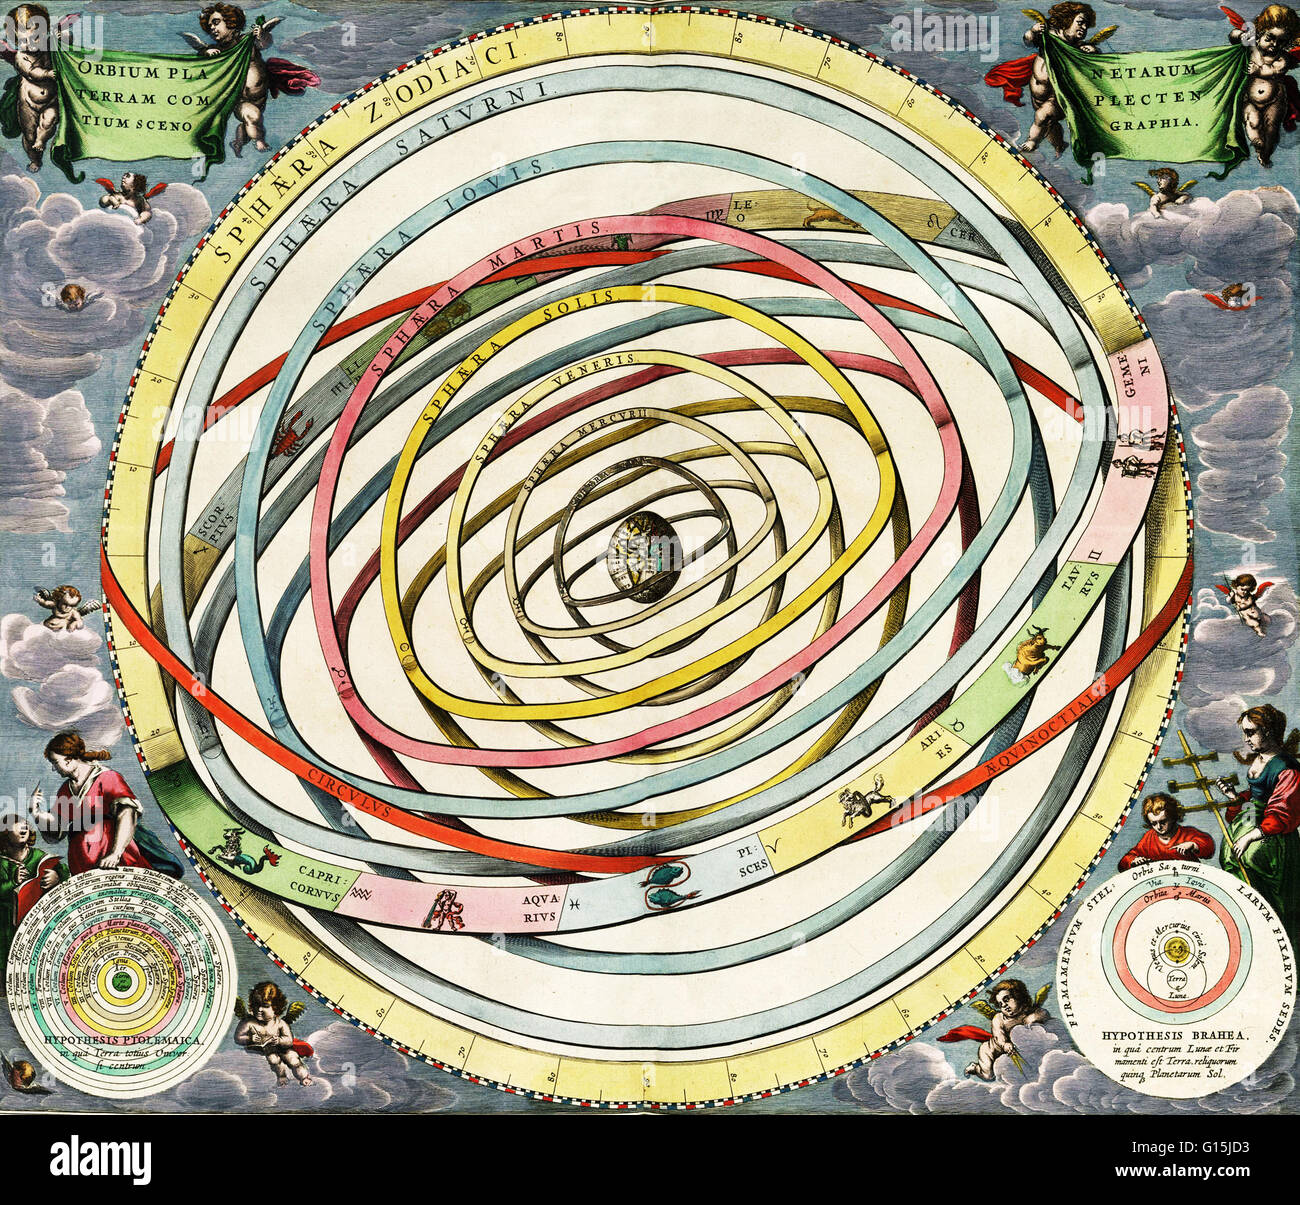 Orbium Planetarum Terram Complectentium Scenographia. Scenography of the planetary orbits encompassing the Earth. Planetary orbits depicting the systems of Ptolemy and Tycho Brahe. In astronomy, the geocentric model (also known as geocentrism, or the Ptol Stock Photo